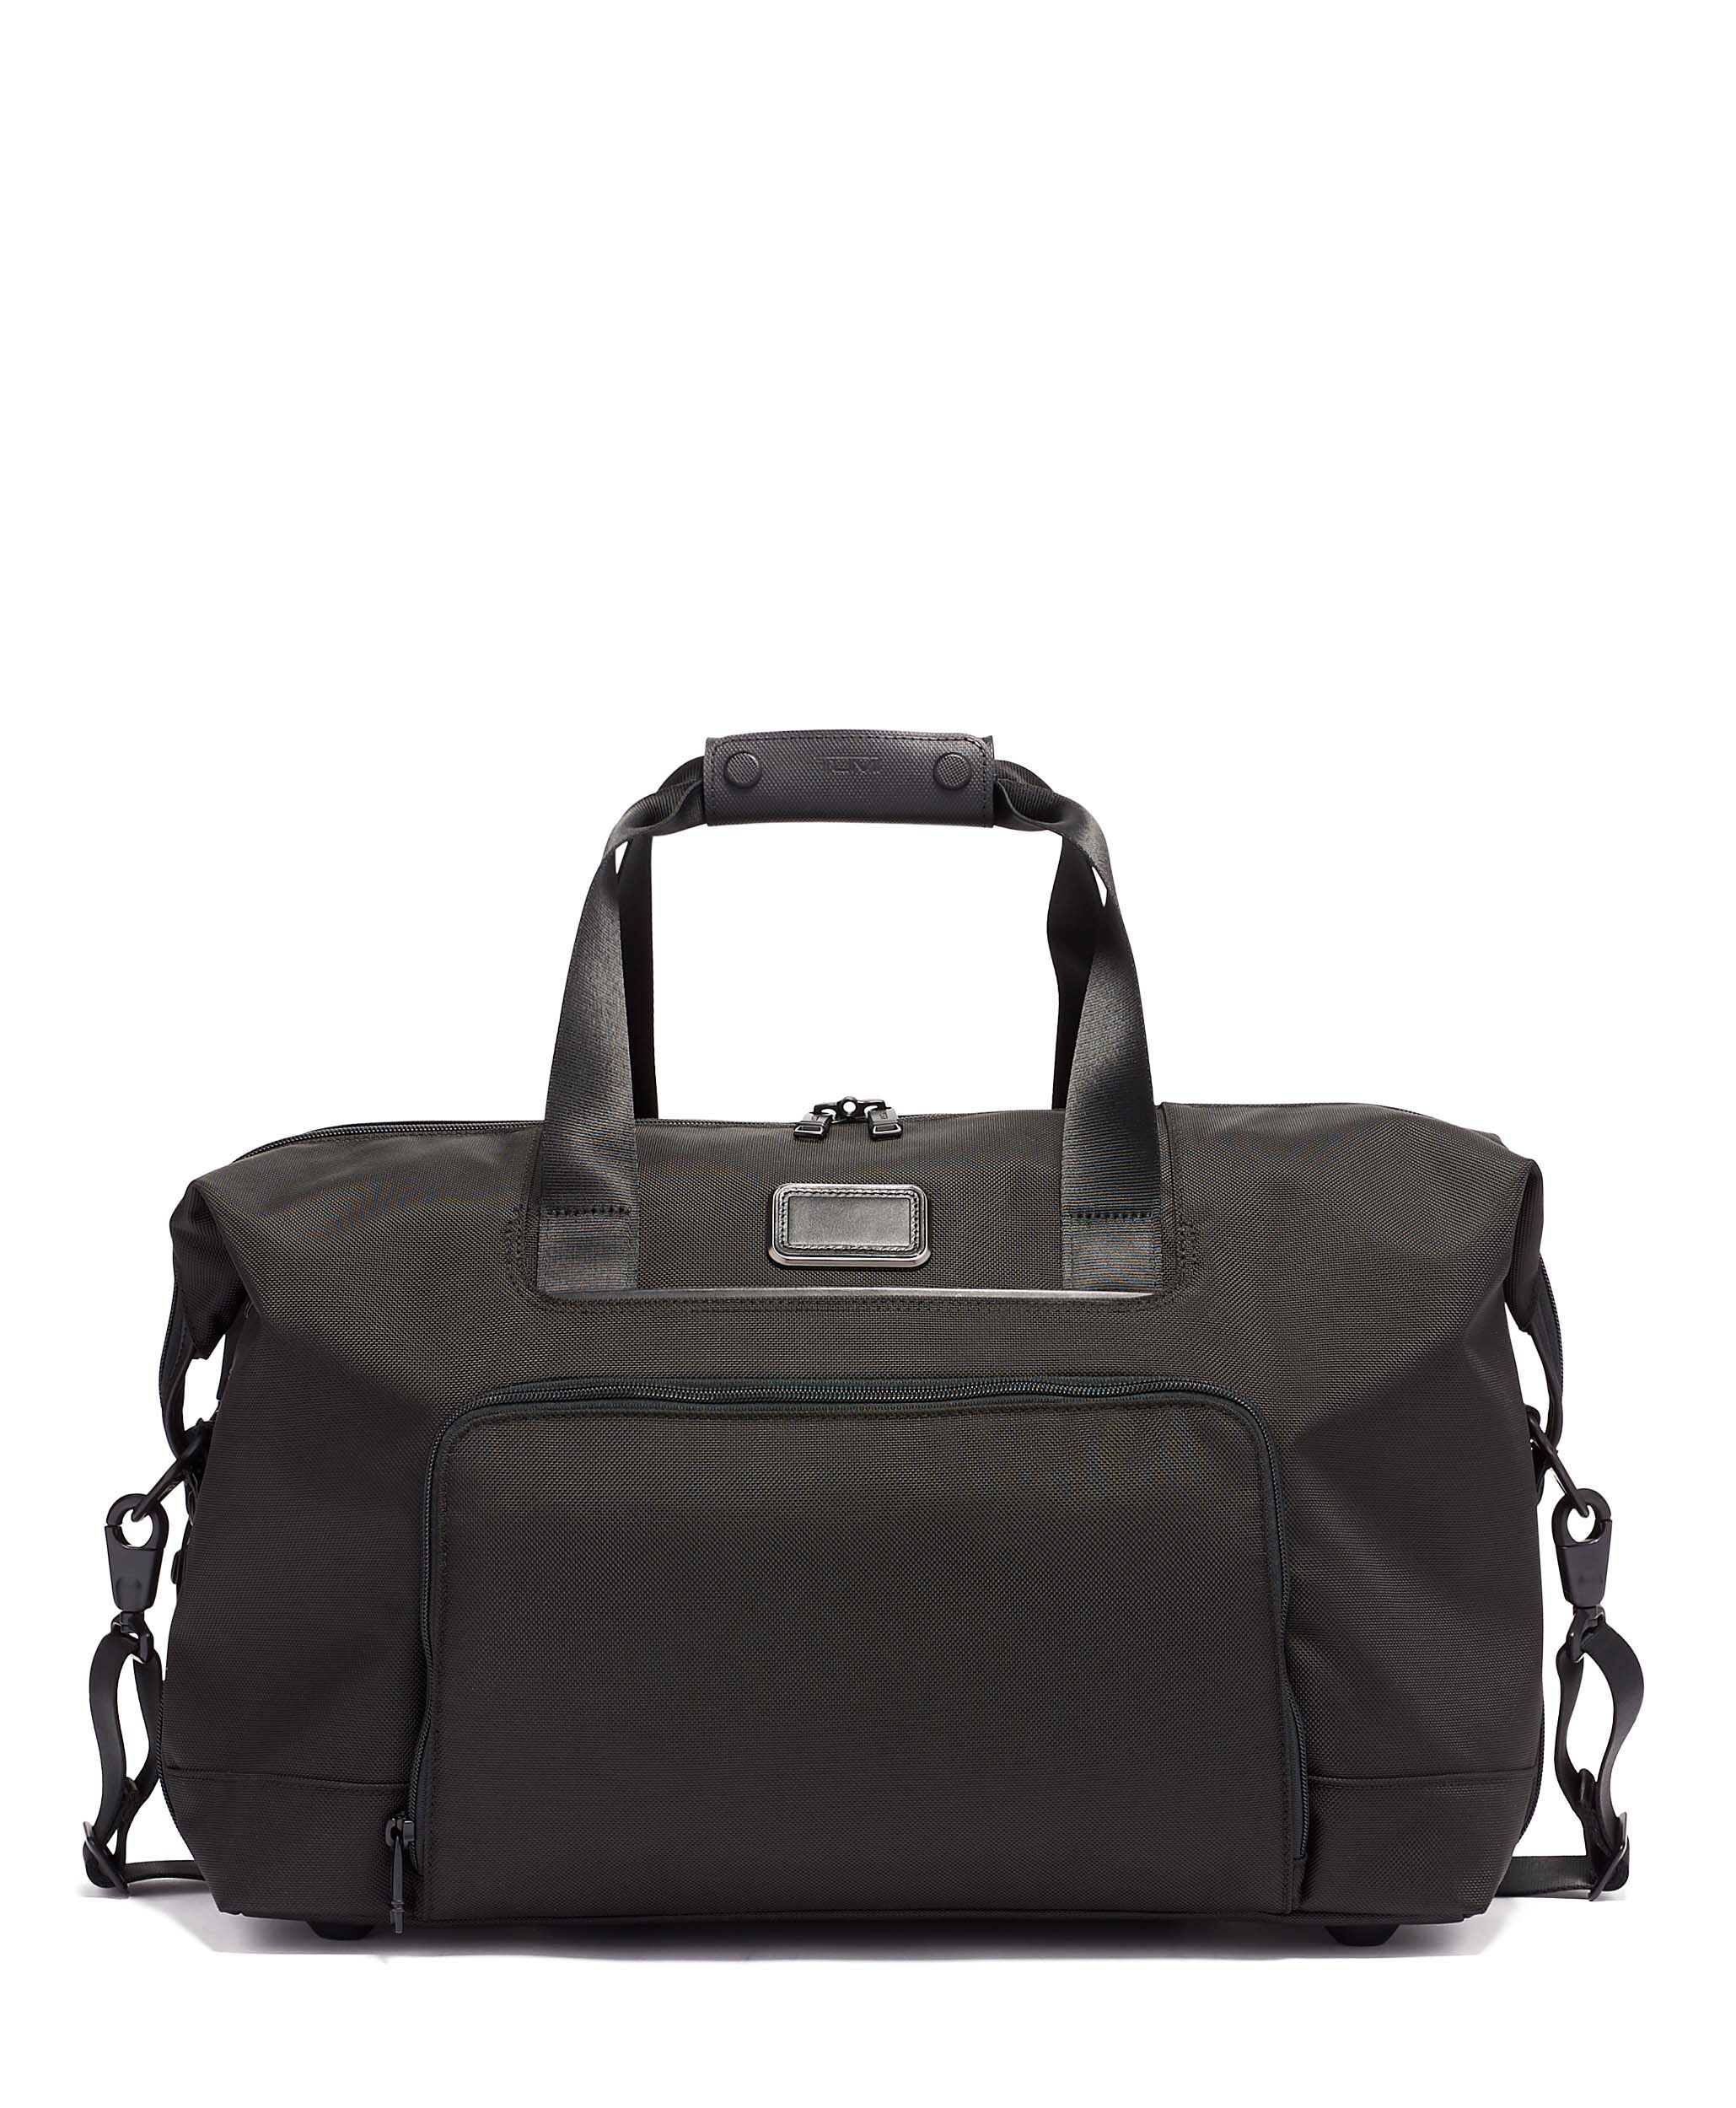 Mens Bags Gym bags and sports bags Tumi 142486 Mason Duffel in Black for Men 